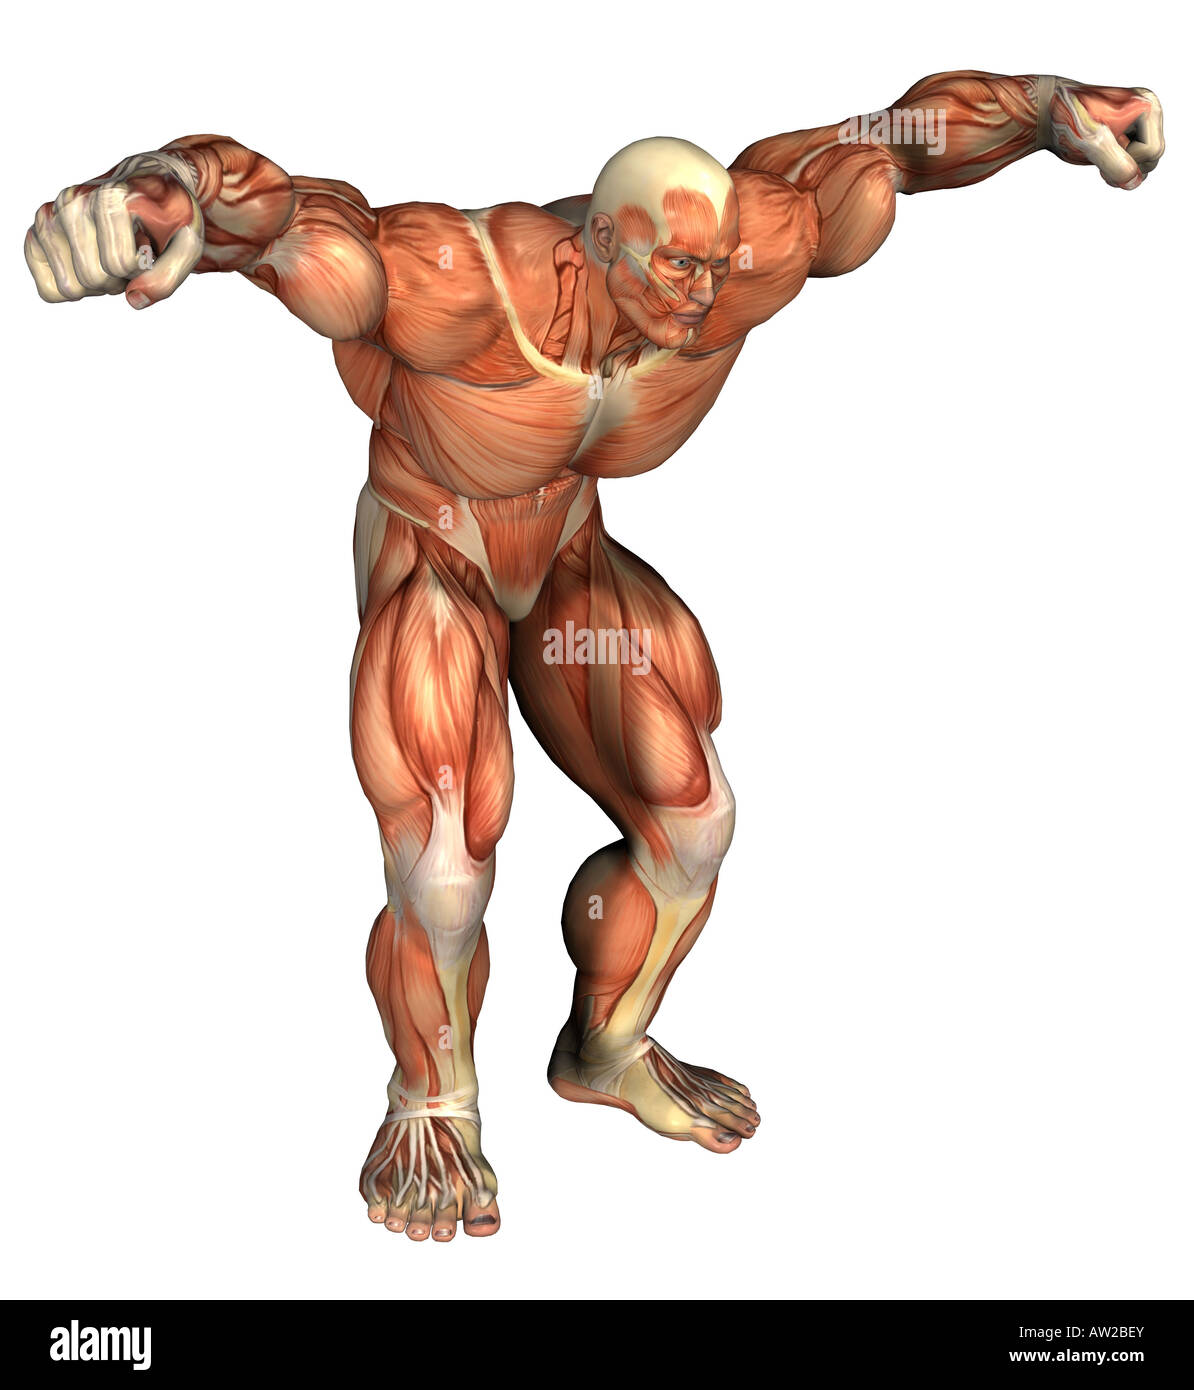 musculature of humans Stock Photo